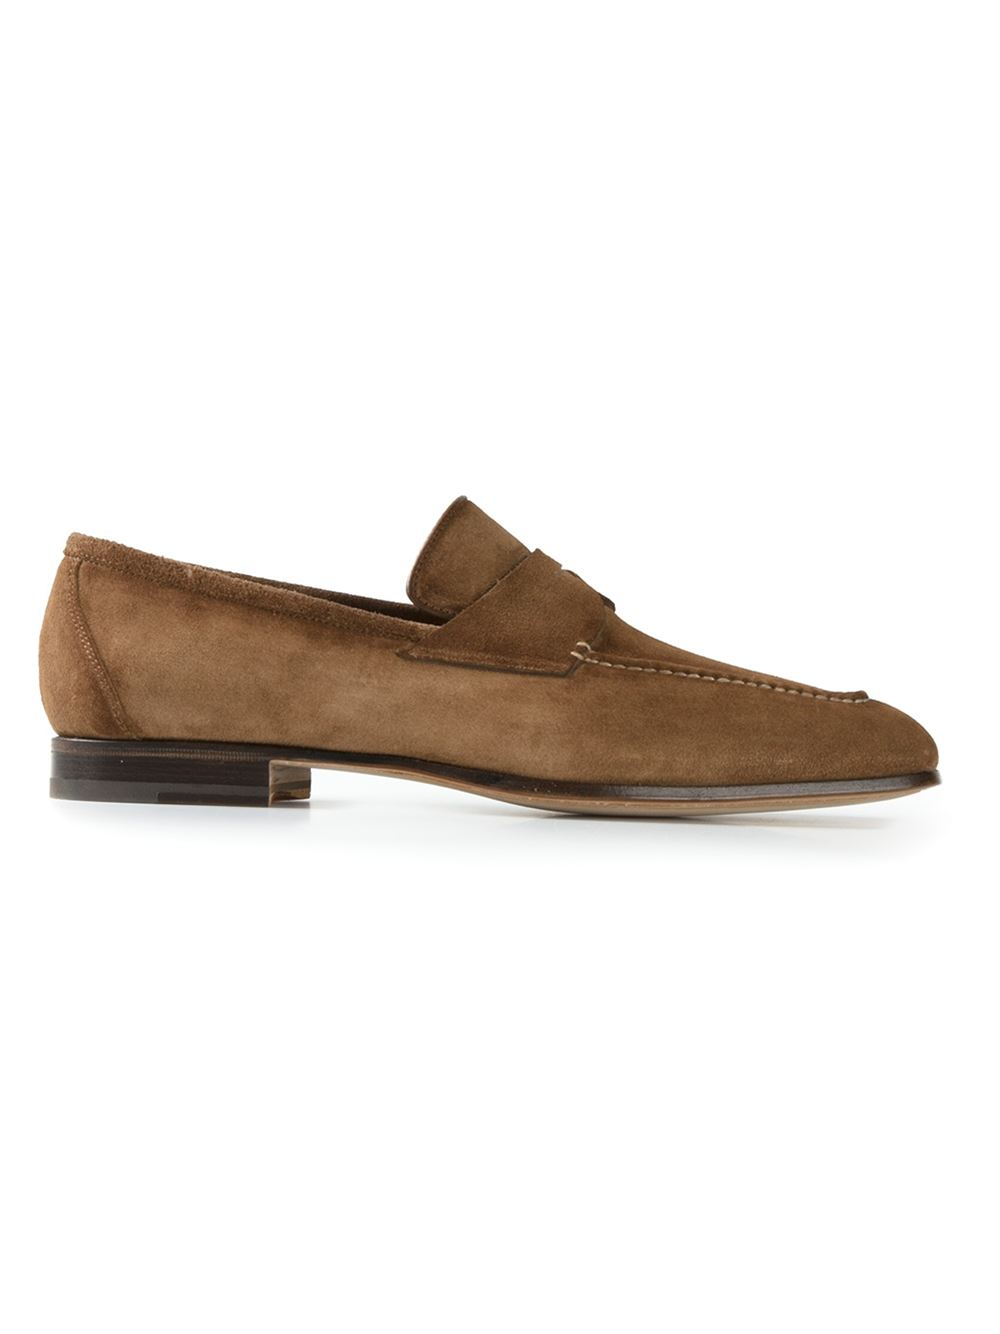 Santoni Classic Penny Loafers in Brown for Men